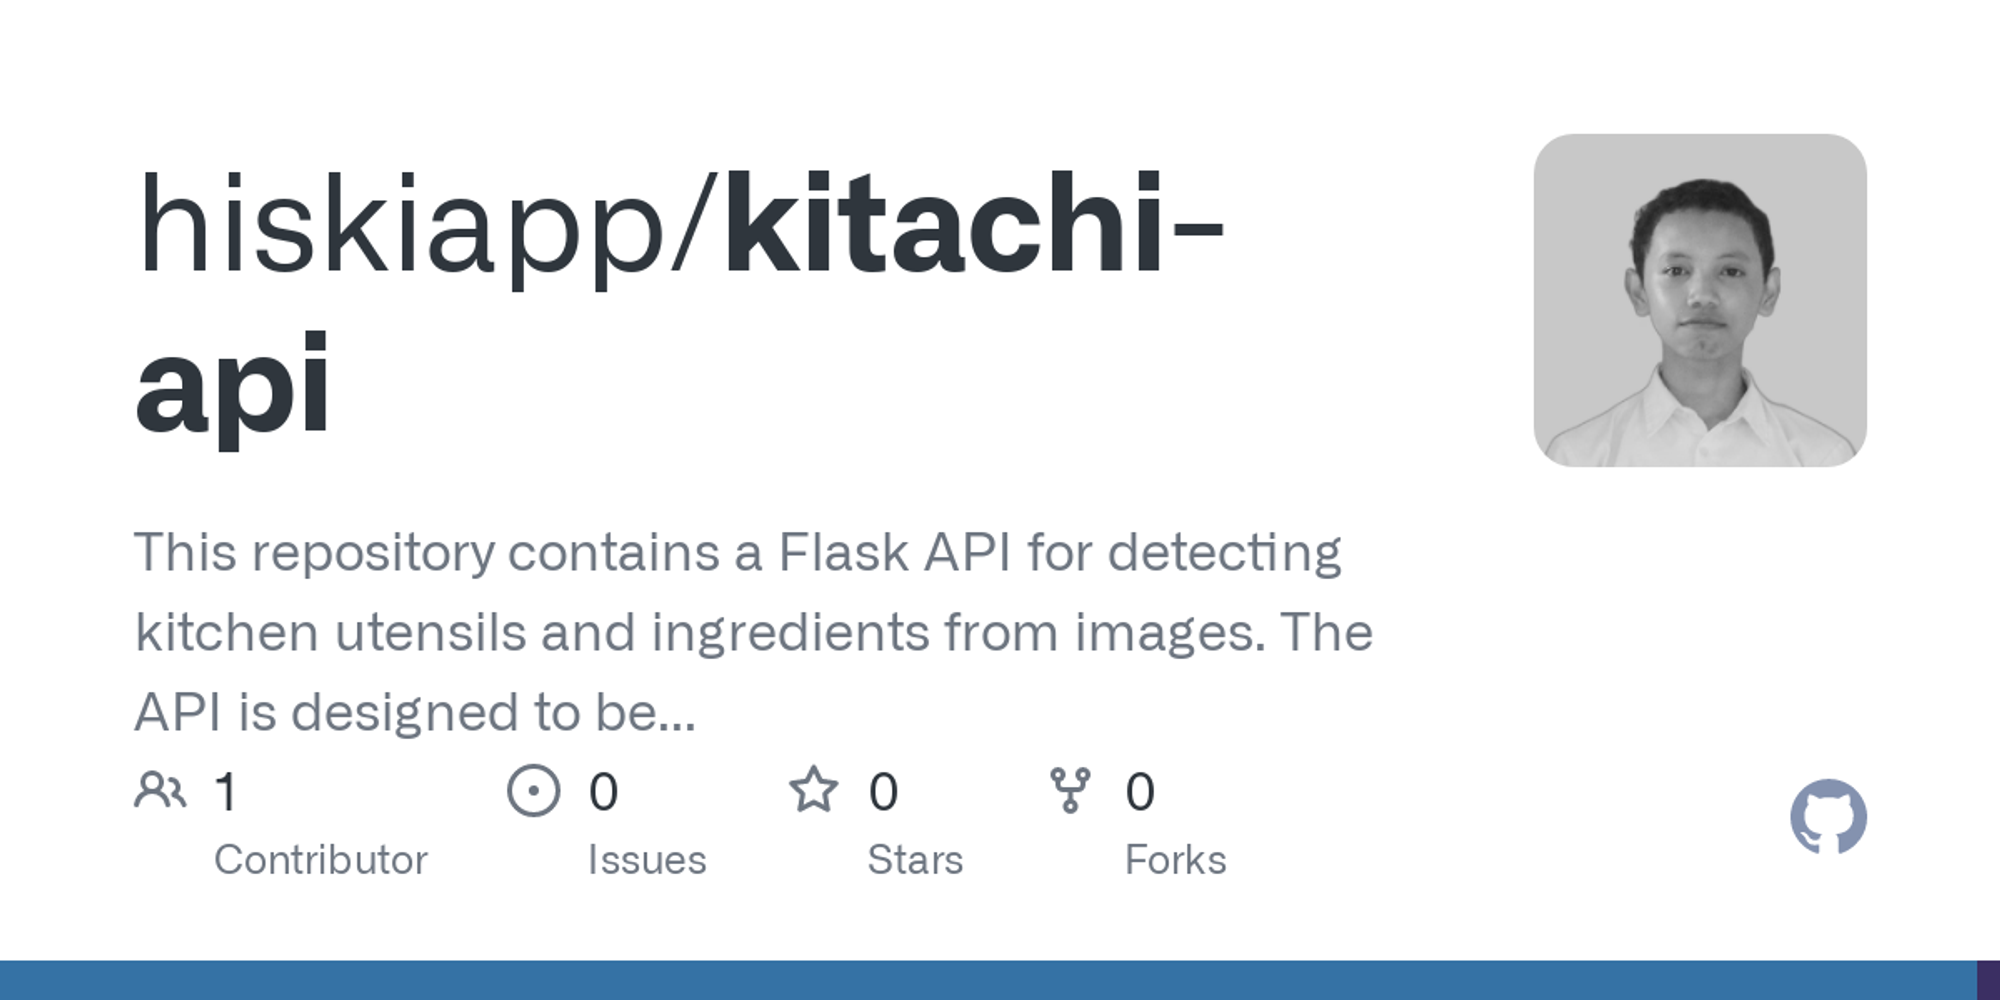 GitHub - hiskiapp/kitachi-api: This repository contains a Flask API for detecting kitchen utensils and ingredients from images. The API is designed to be easy to use and deploy, and can be integrated into a variety of applications.